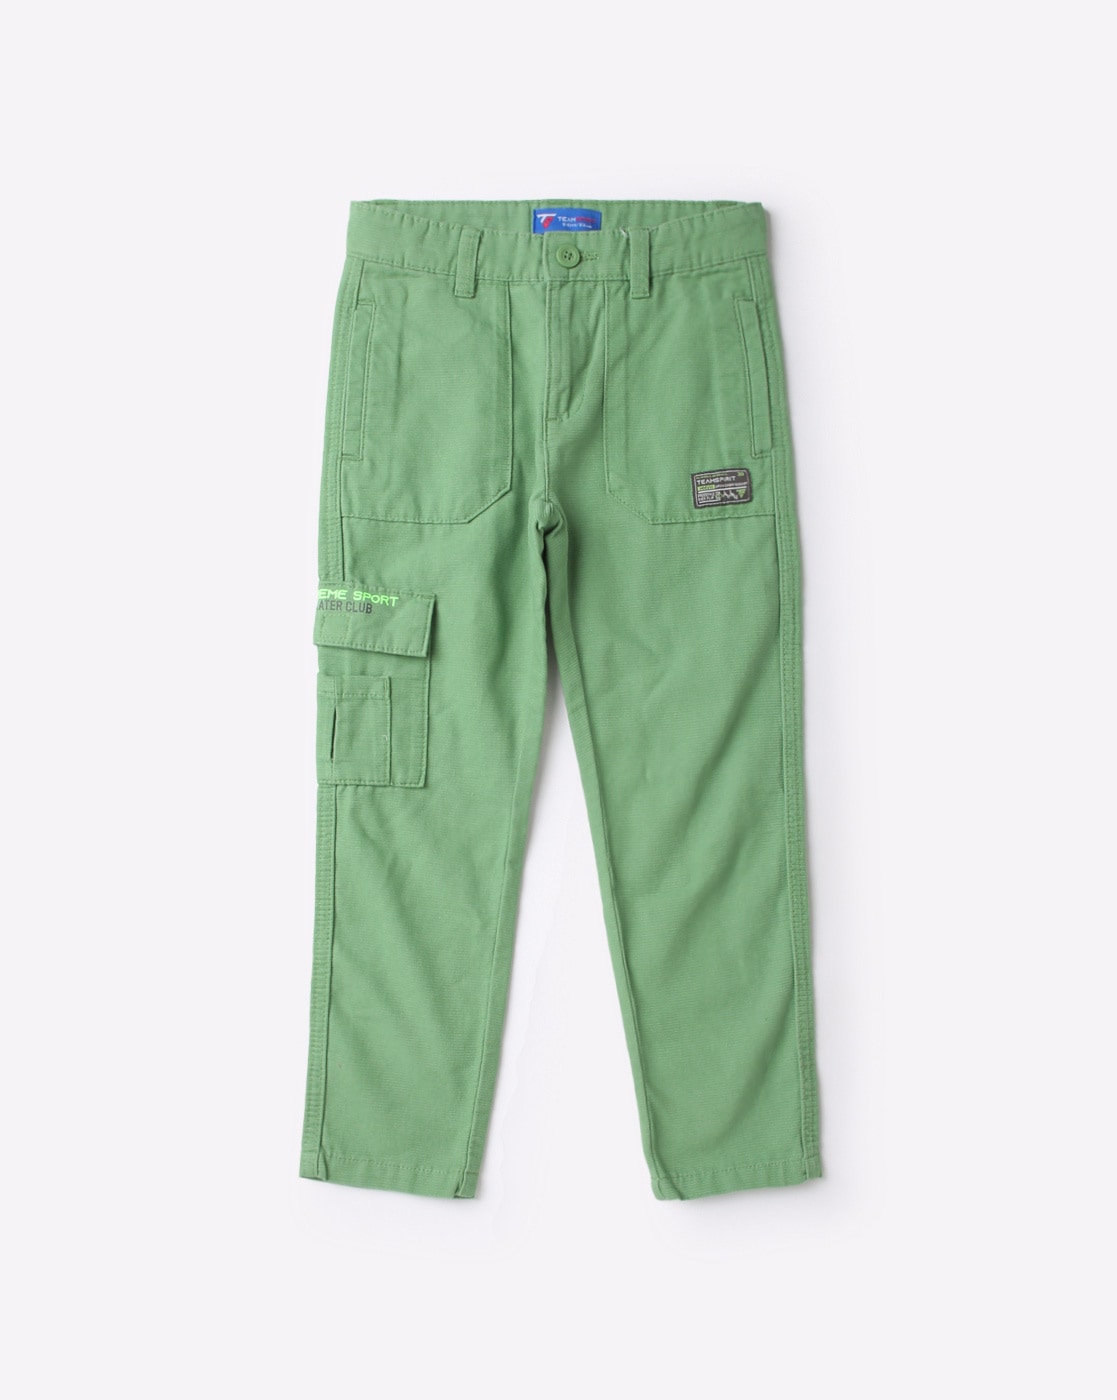 Buy Boys Green Boys Solid Flat Front Trousers online at NNNOW.com